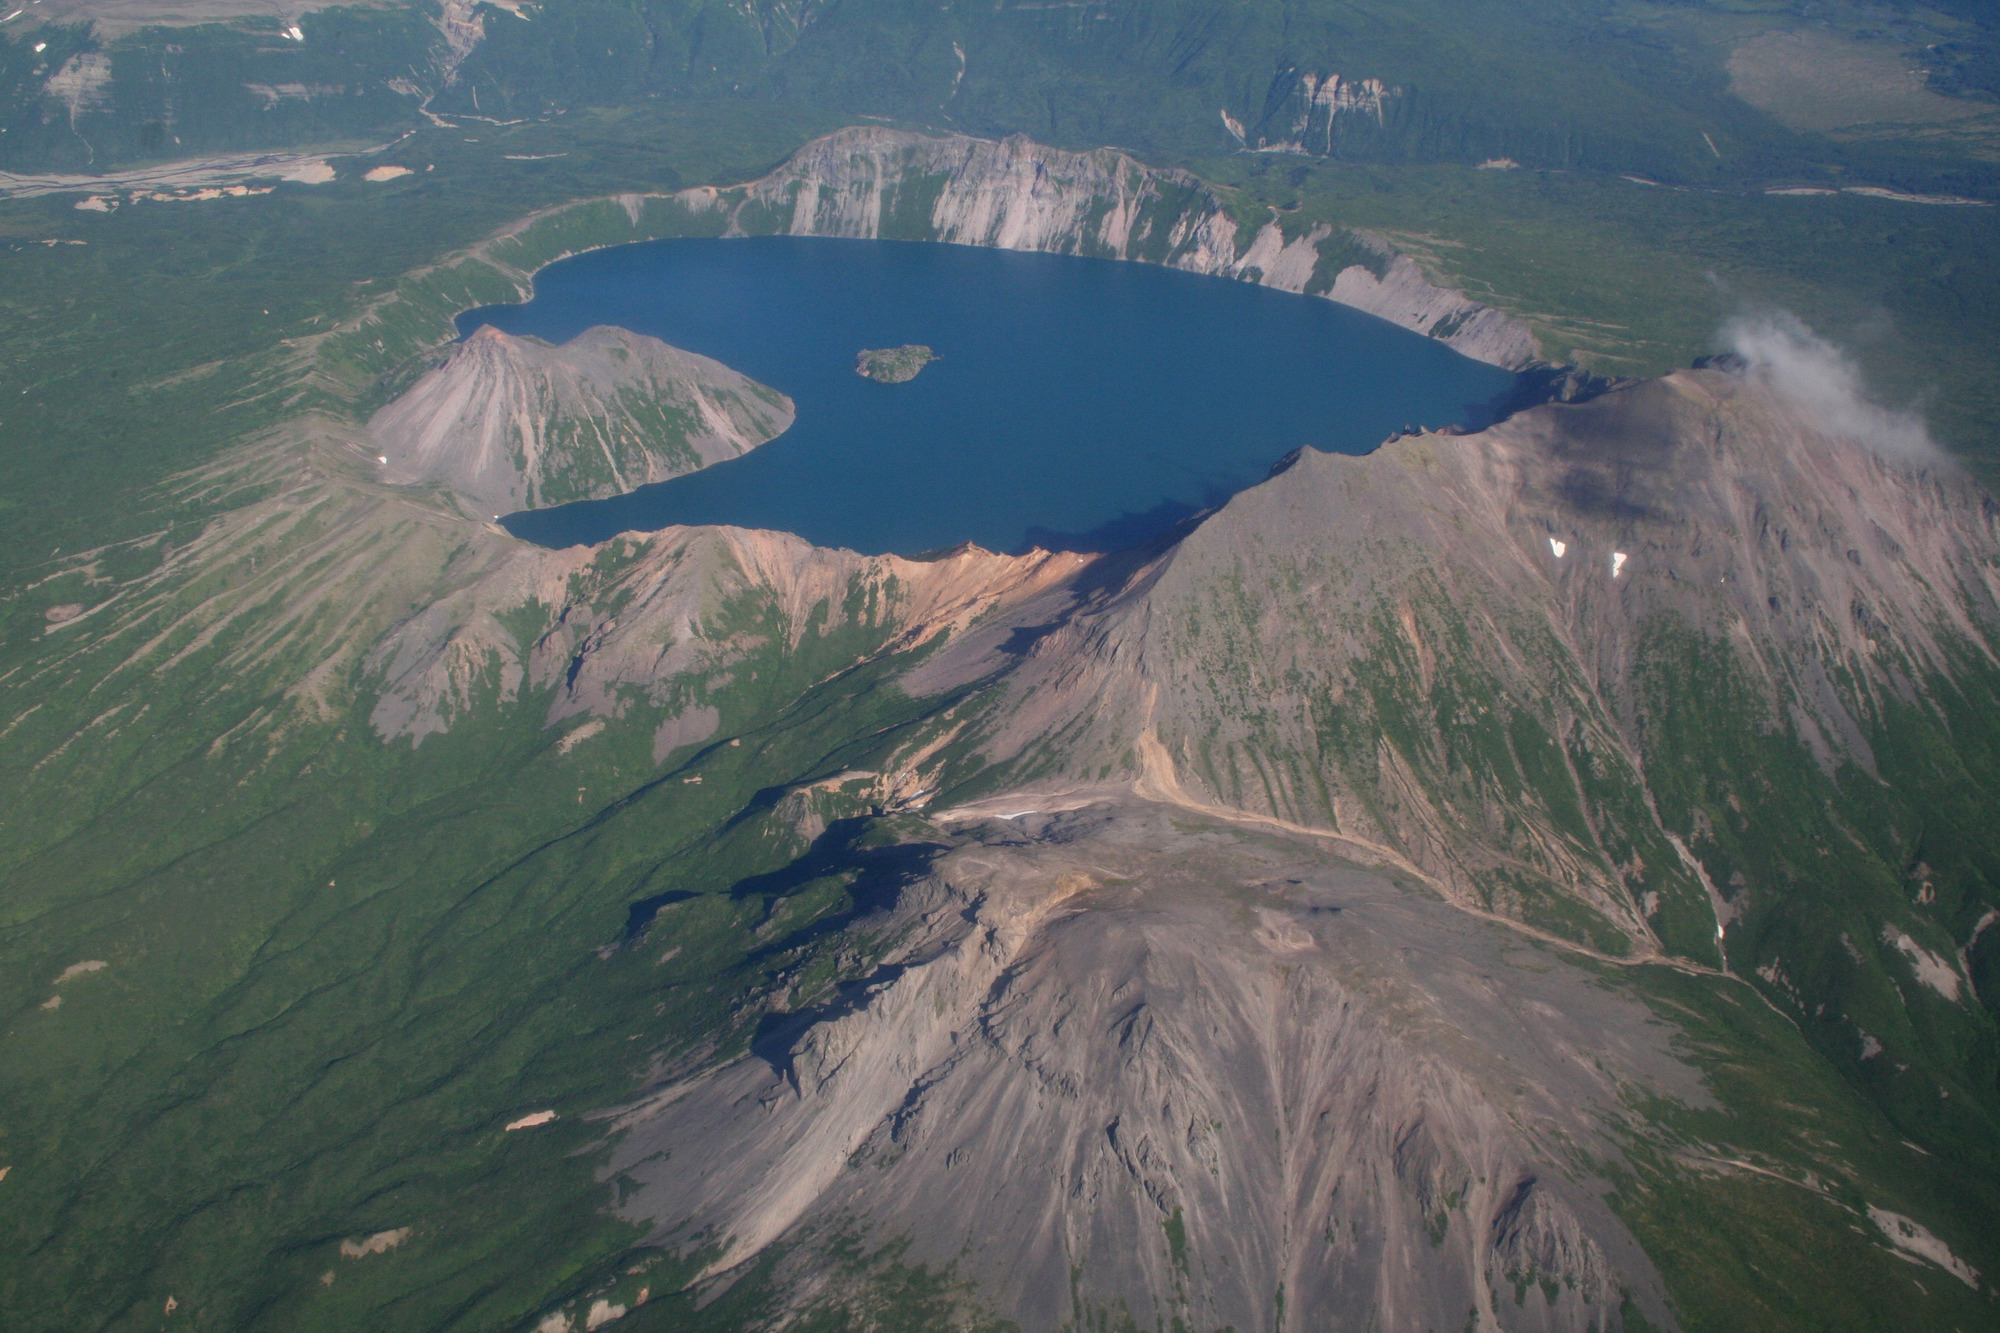 Volcanic crater filled with a lake